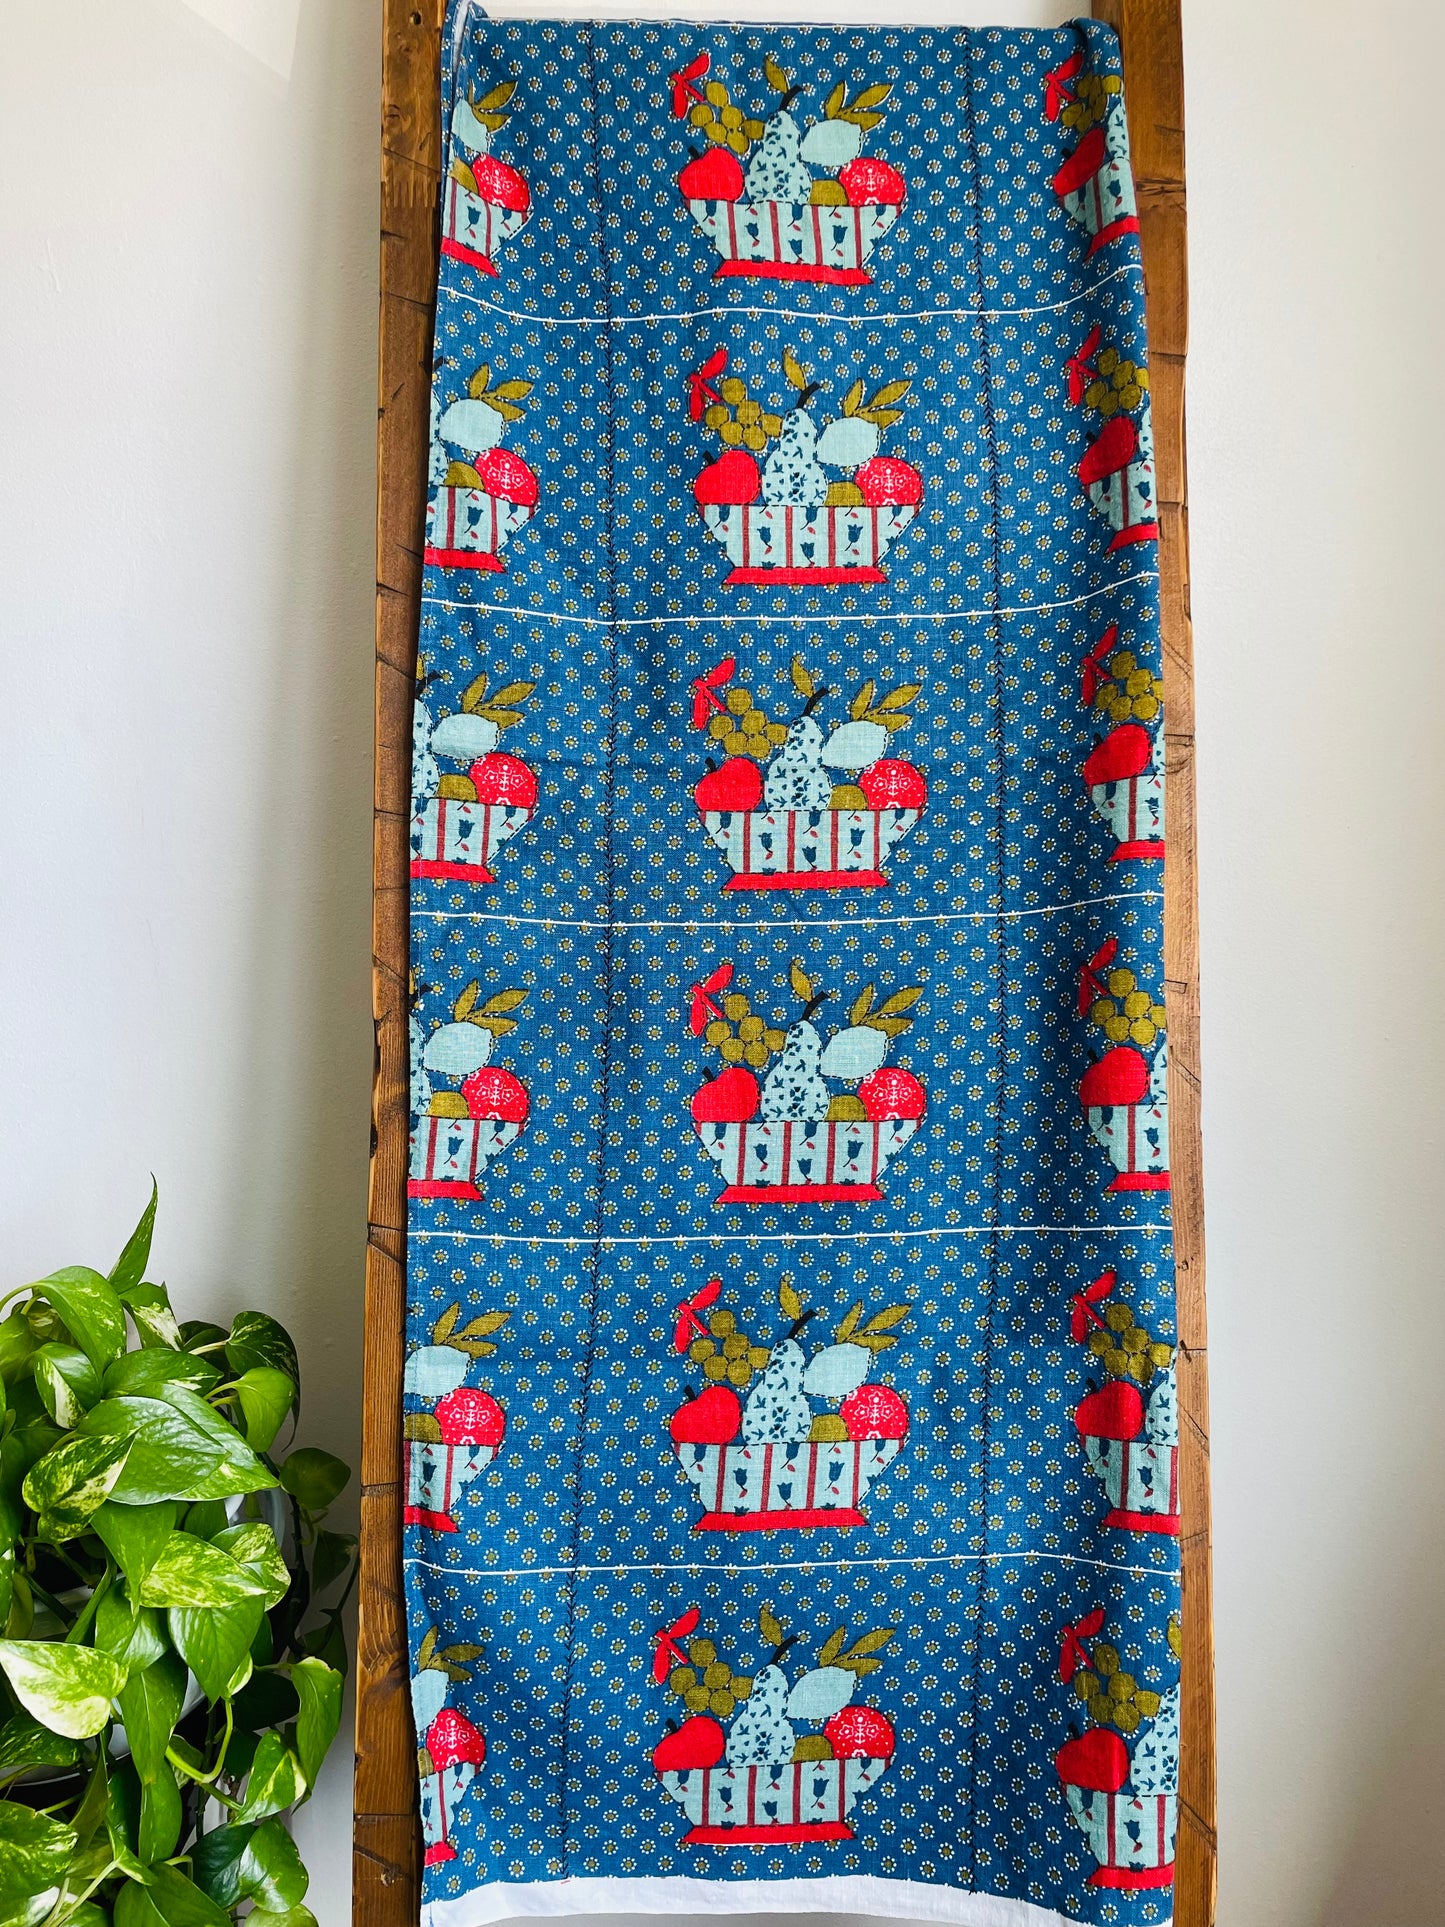 Adorable Blue Linen Tablecloth with Flower Background & Fruit Bowl Graphic - Also Makes Great Fabric!